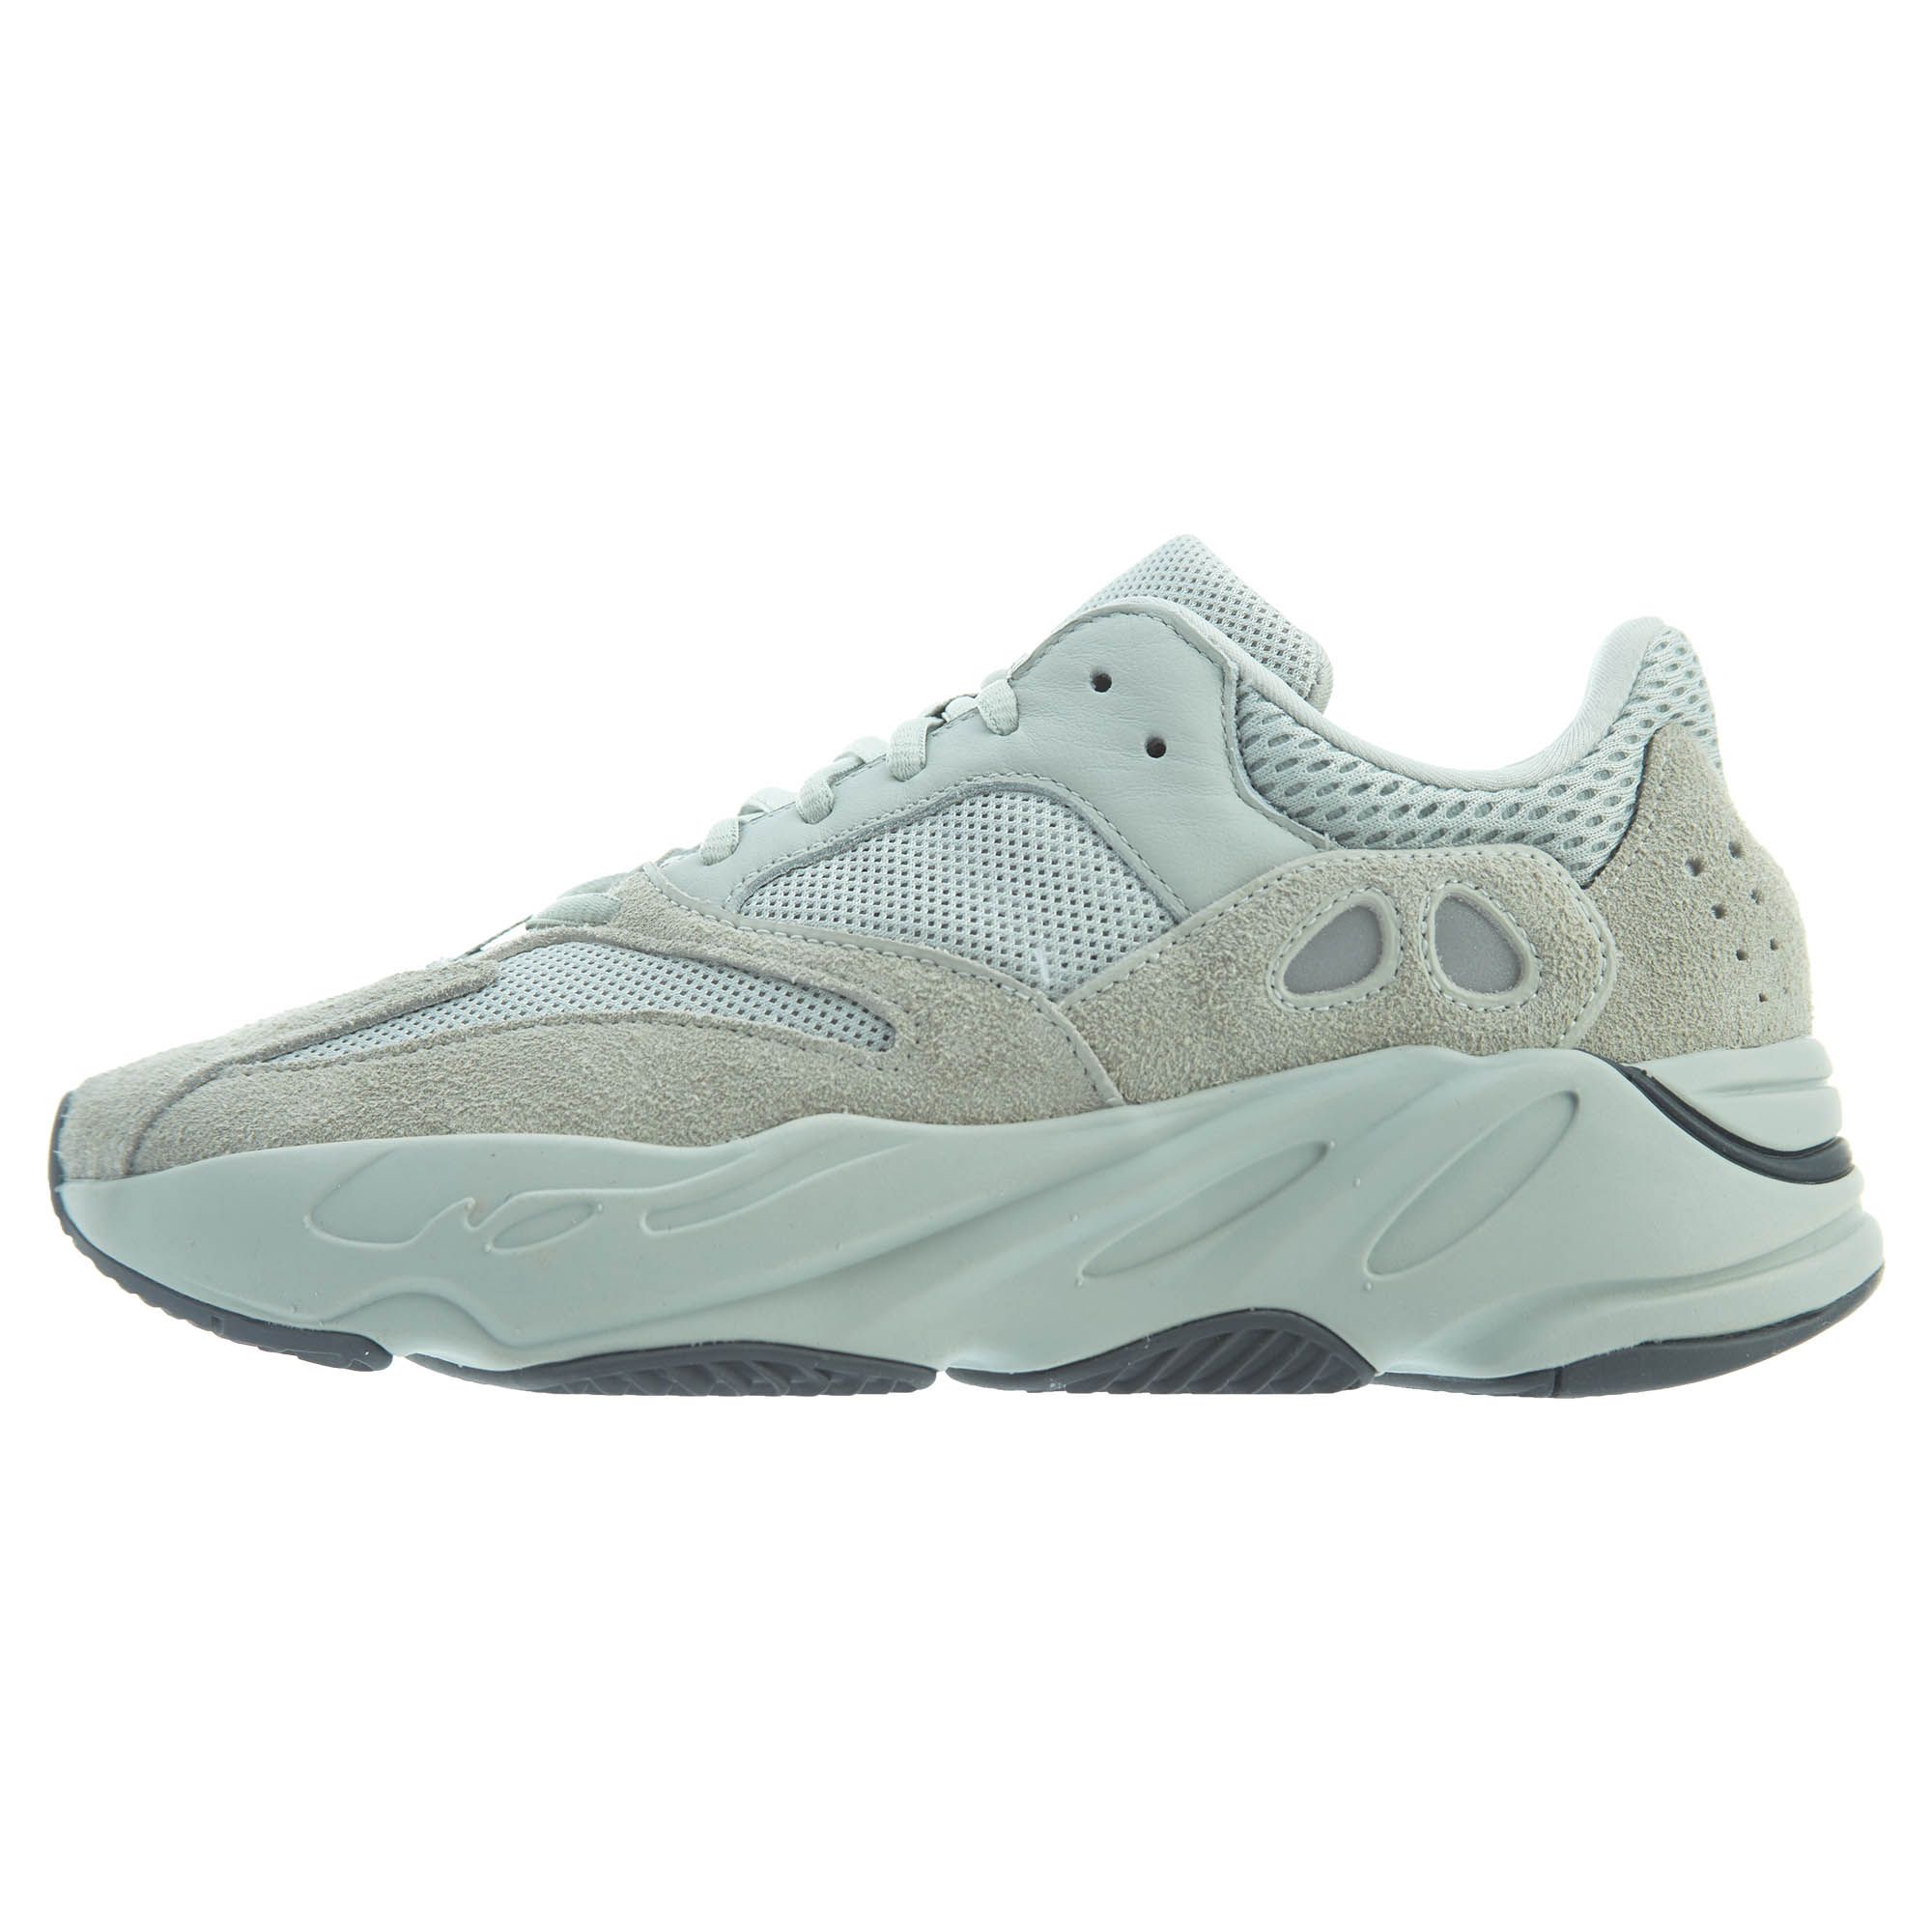 Adidas Yeezy Boost 700 Mens Style 